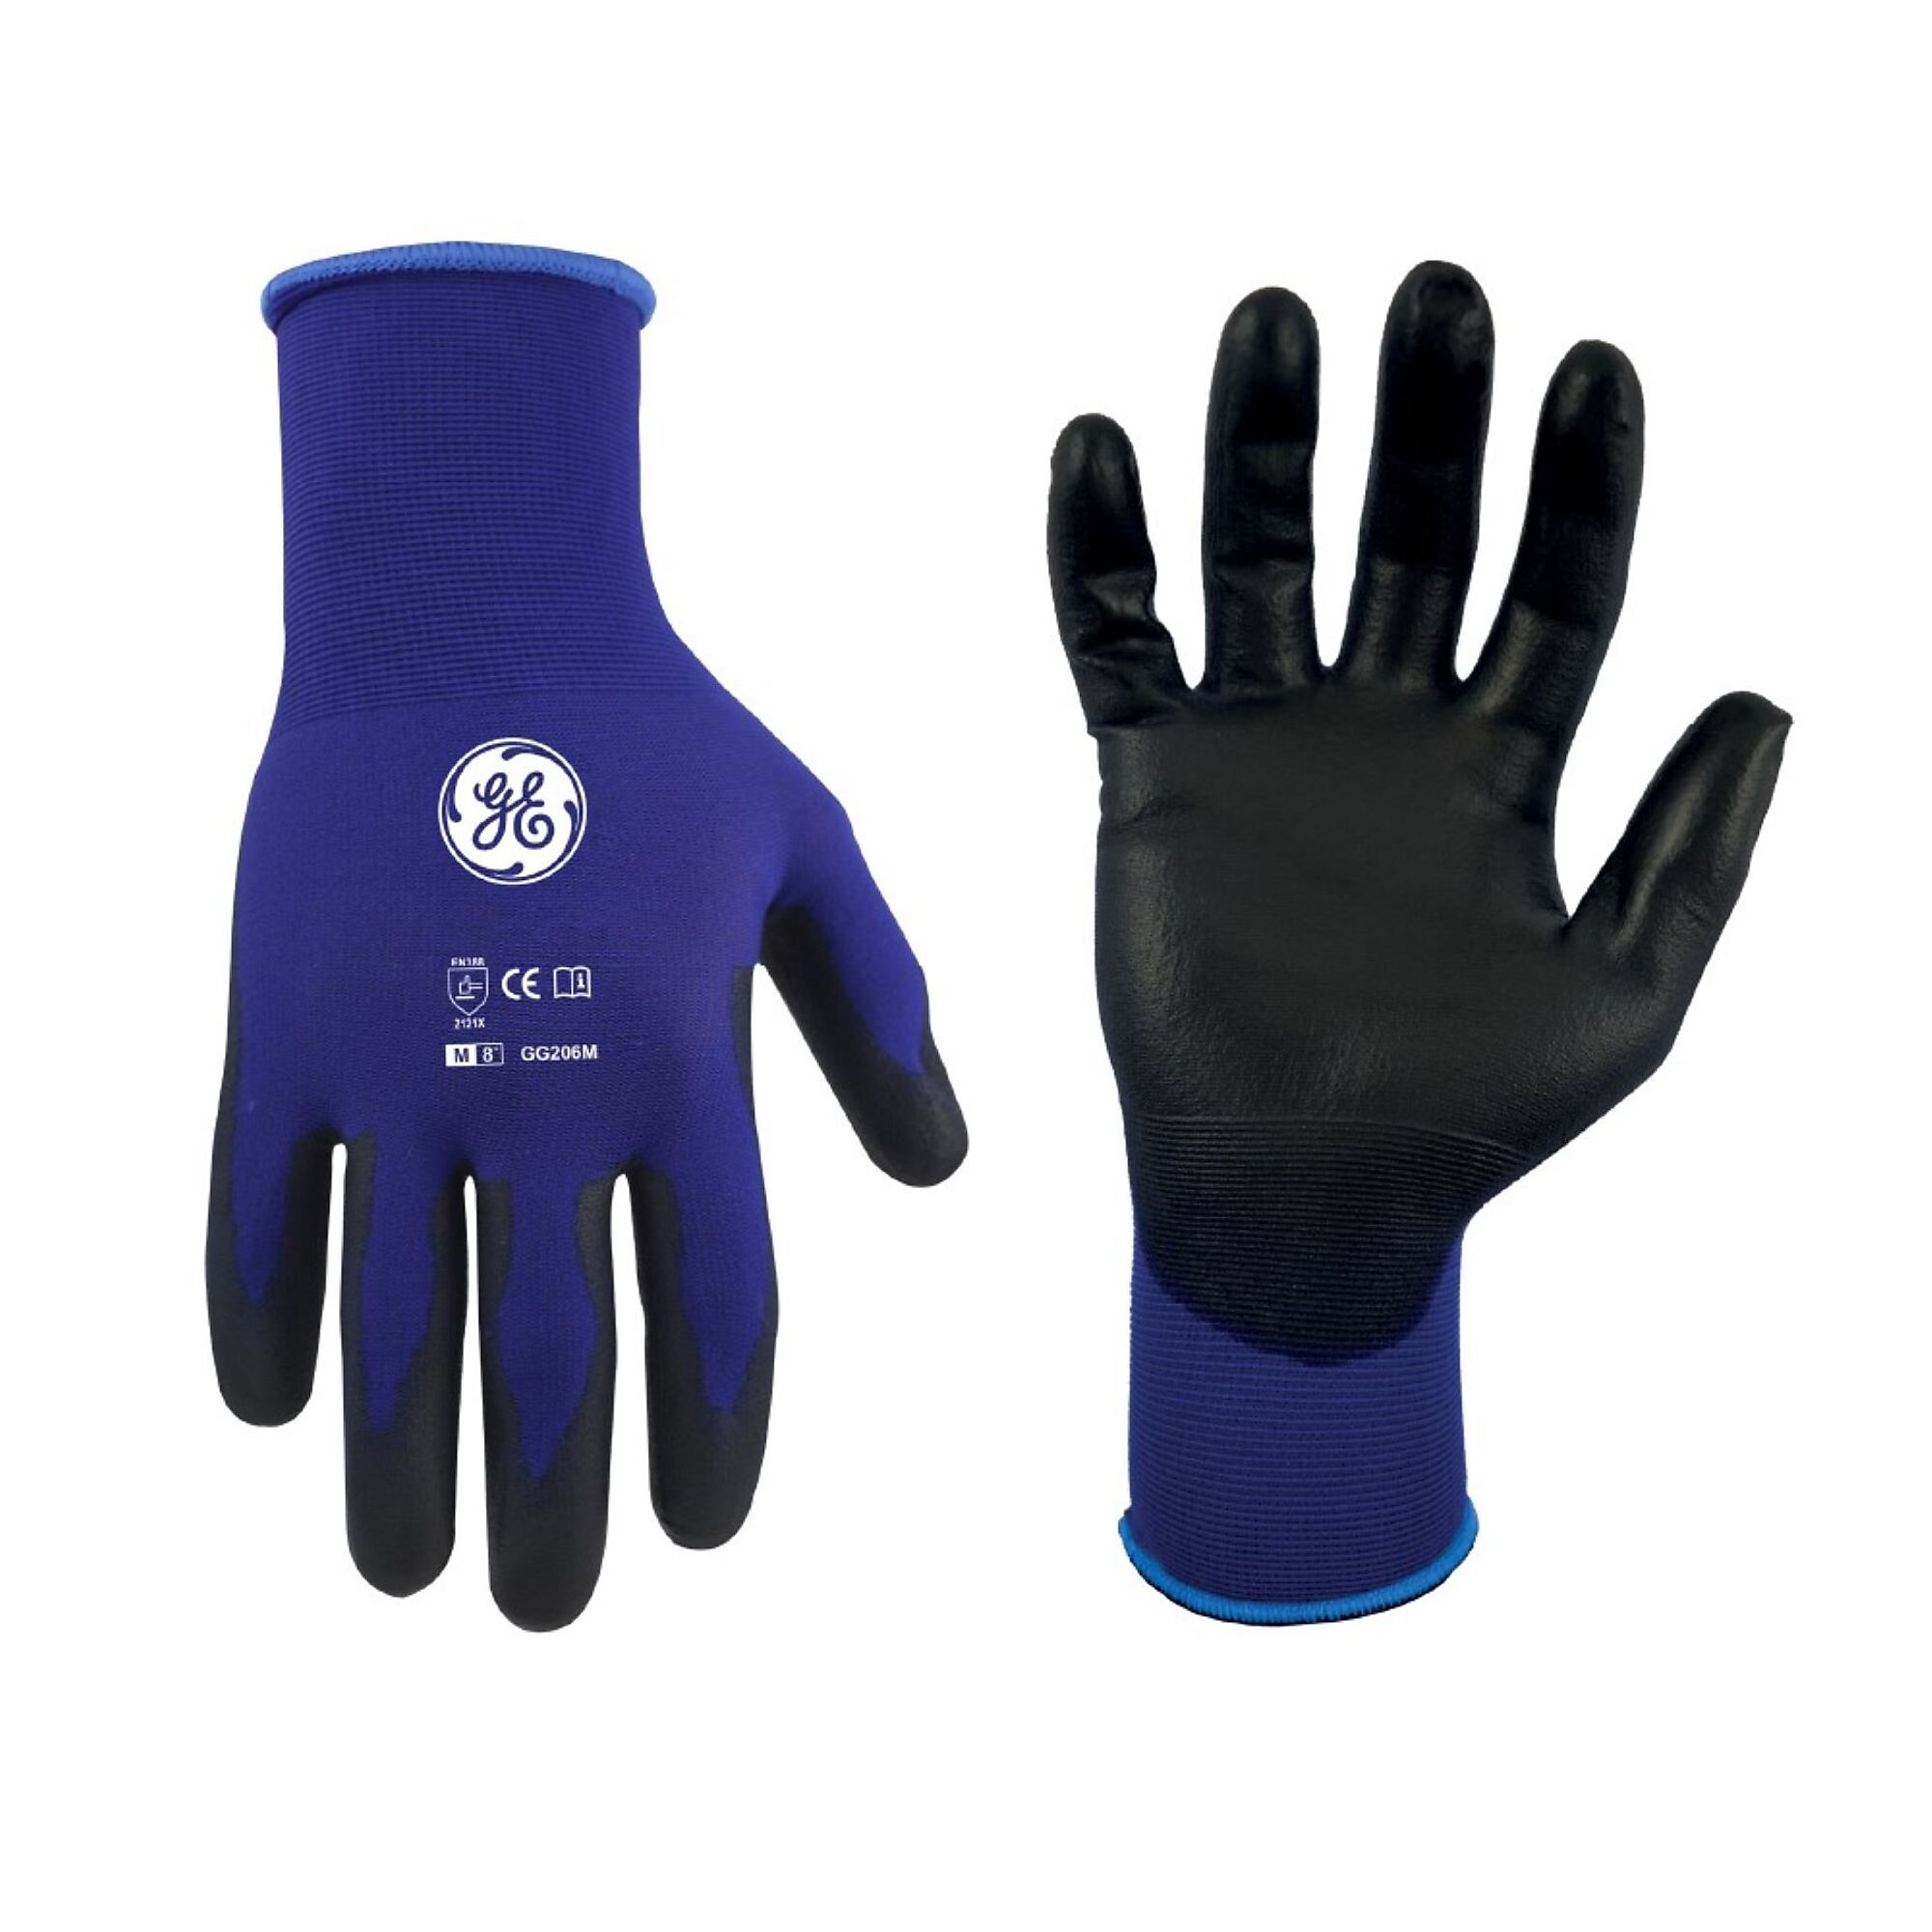 General Electric, Unisex Dipped Gloves Black/Blue M 12 pair, Size M, Included (qty.) 12, Model GG206M